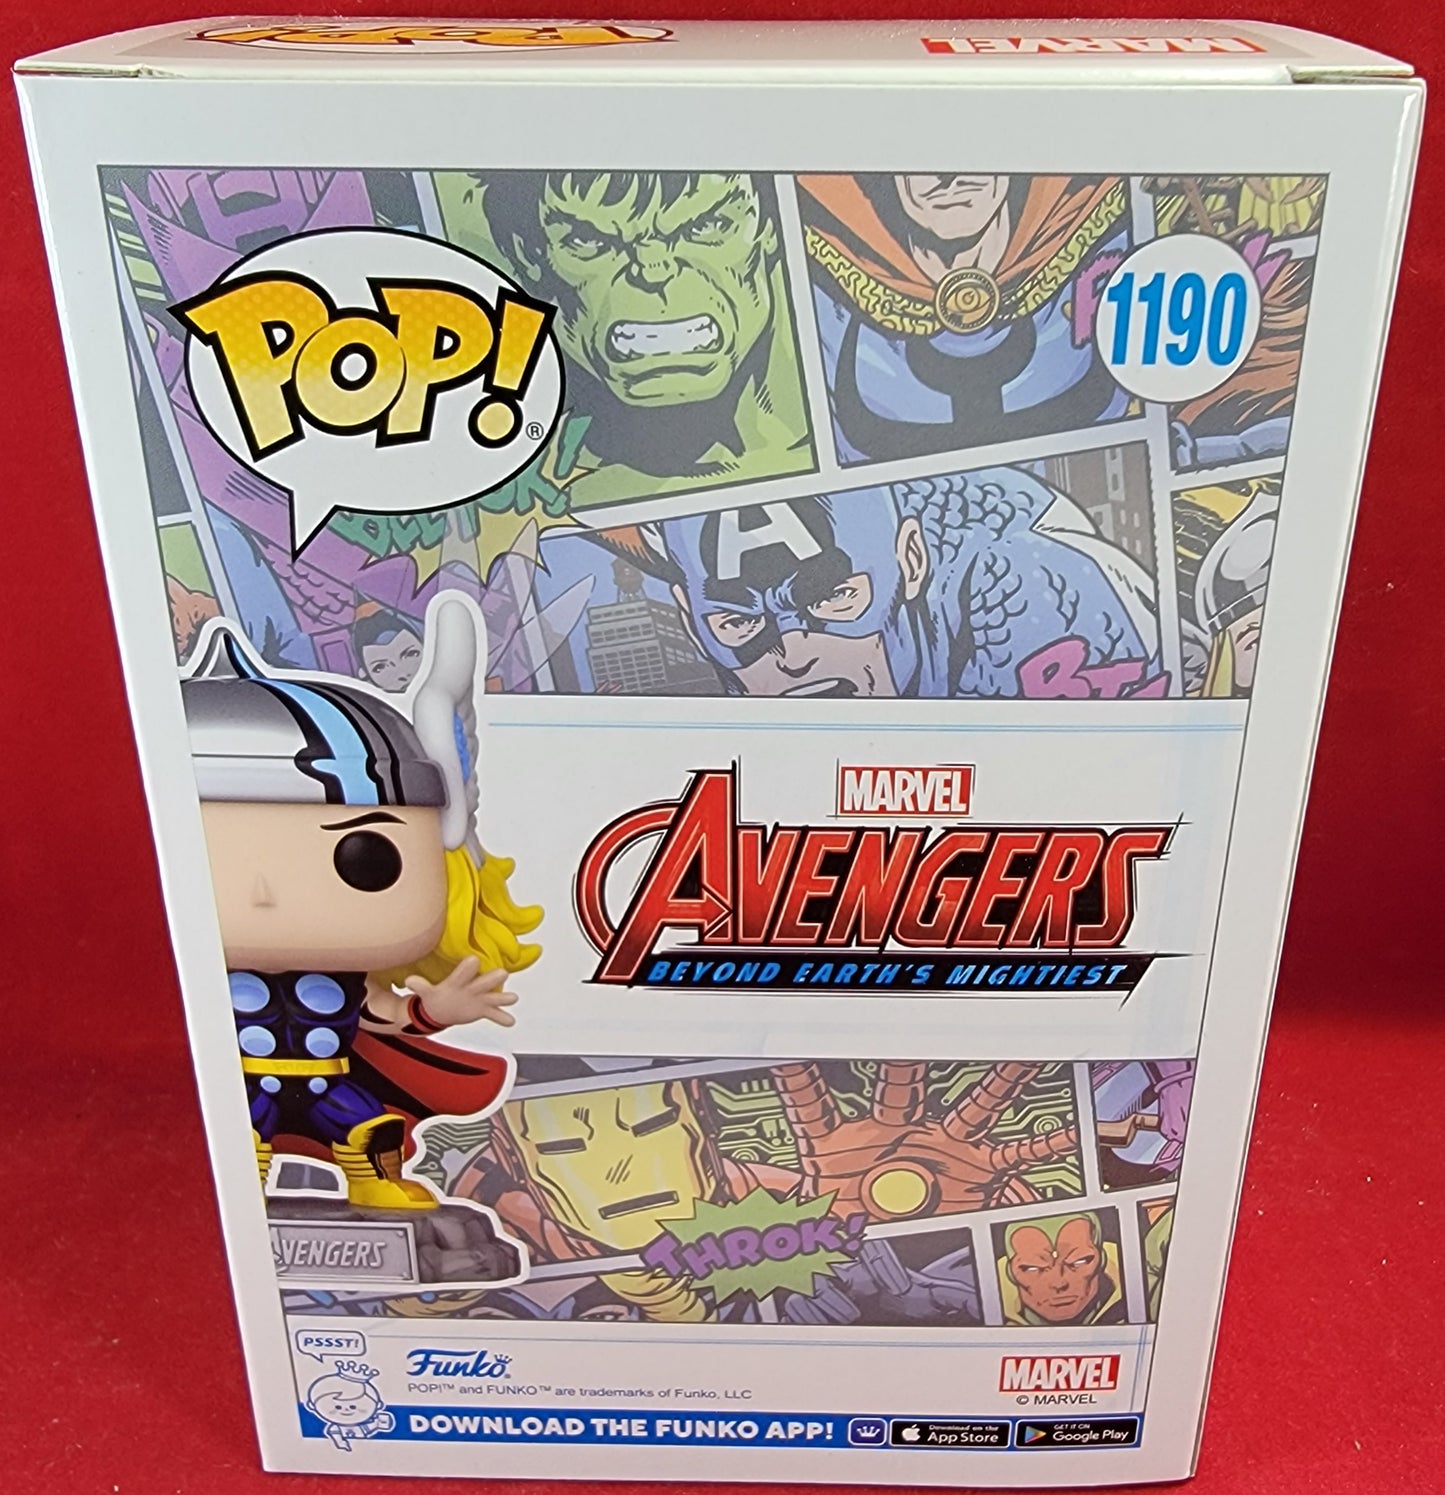 Thor amazon Exclusive funko # 1190 (nib)
brand new Marvel avengers beyond earth's mightiest. pop has thor and pin in comic book form. pop is in near perfect condition and will be shipped in a compatible pop protector.